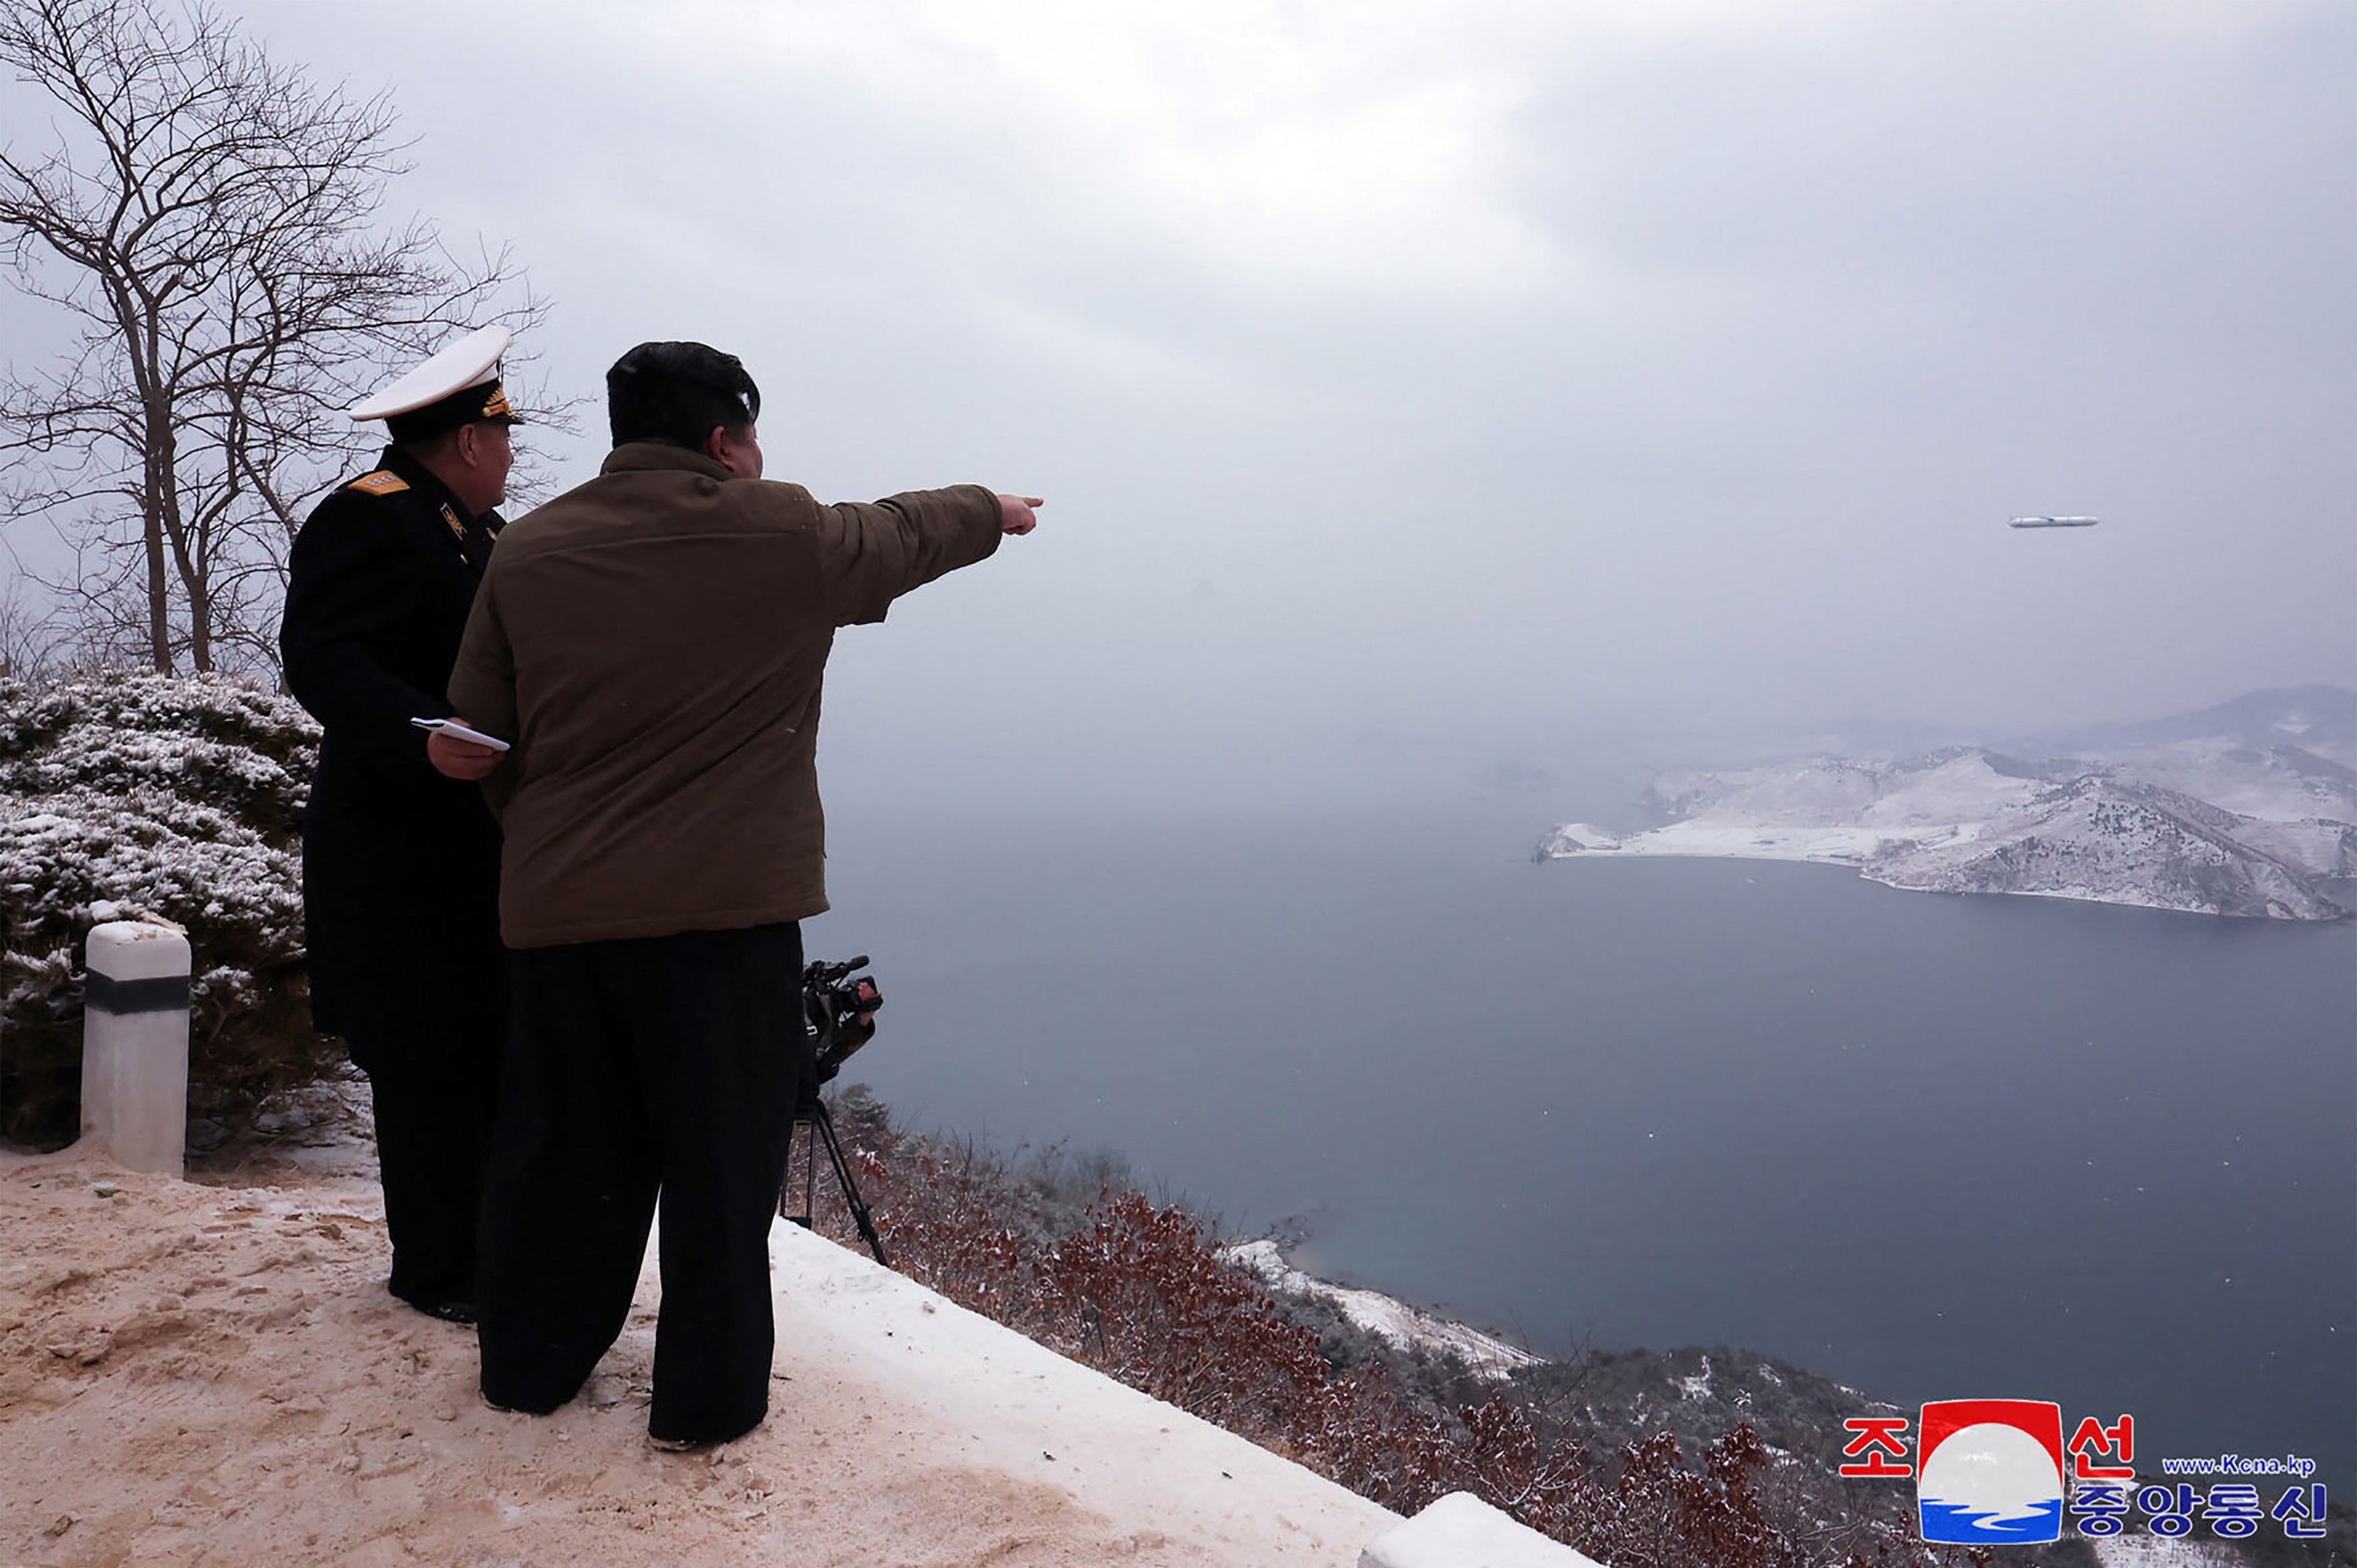 Kim Jong Un reacts to the launch of a Pulhwasal-3-31 missile